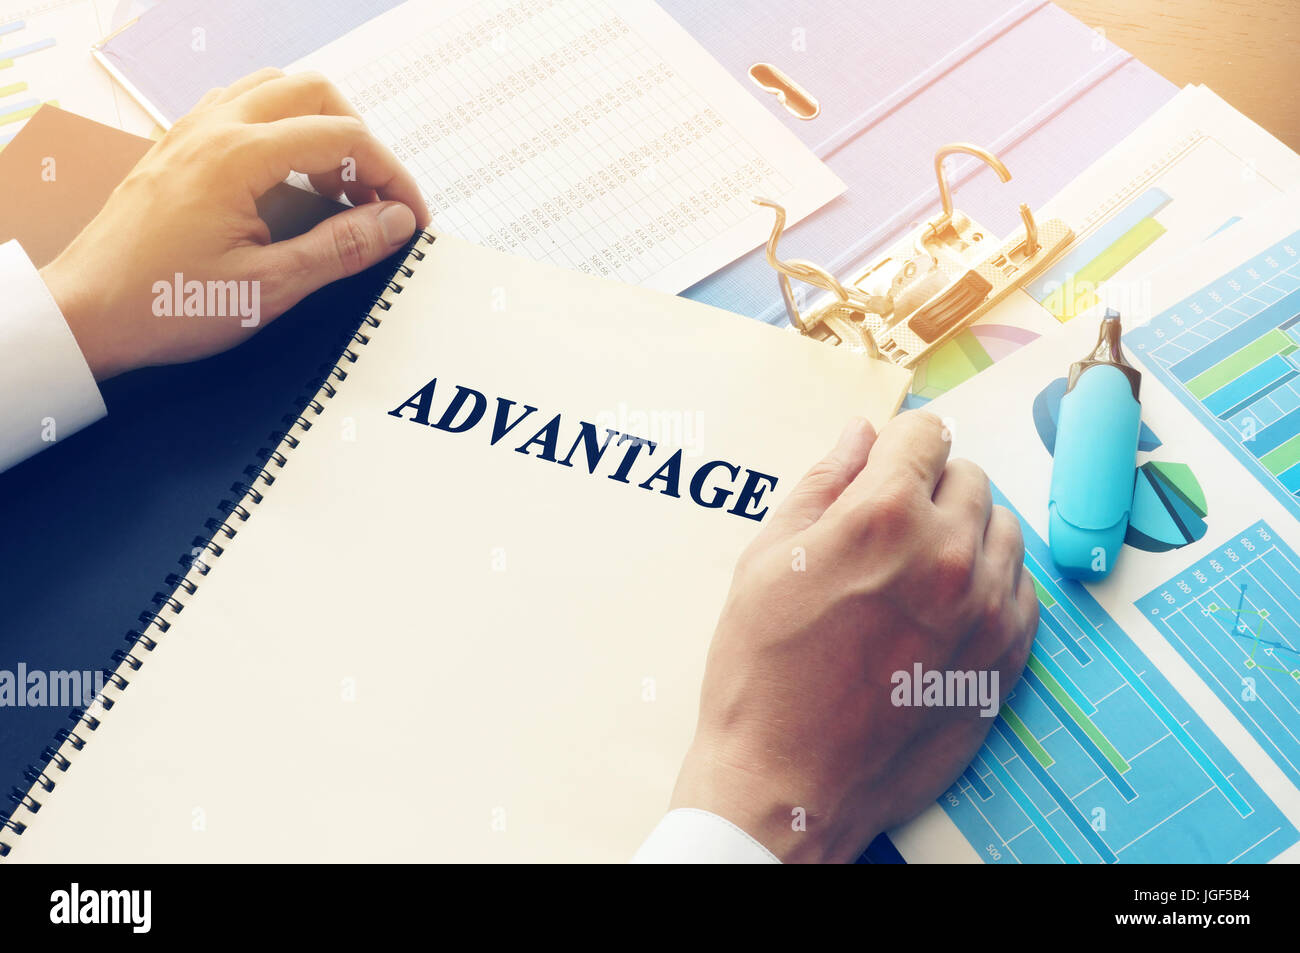 Manager taking book with name Advantage. Stock Photo